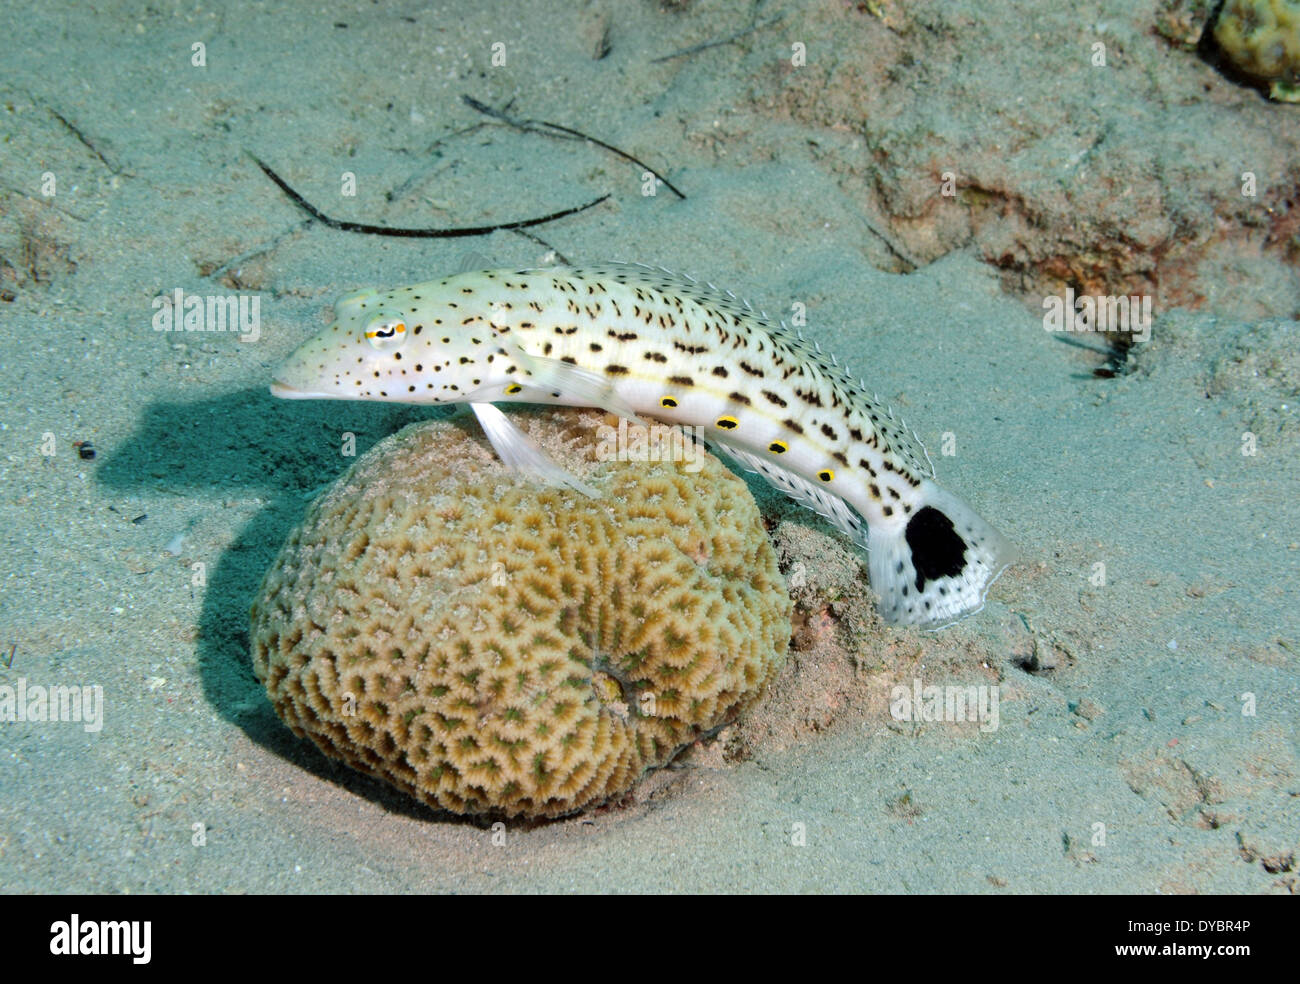 Speckled sandperch, Parapercis hexophthalma, rests on coral, Gulf of Aqaba, Red Sea, Jordan Stock Photo